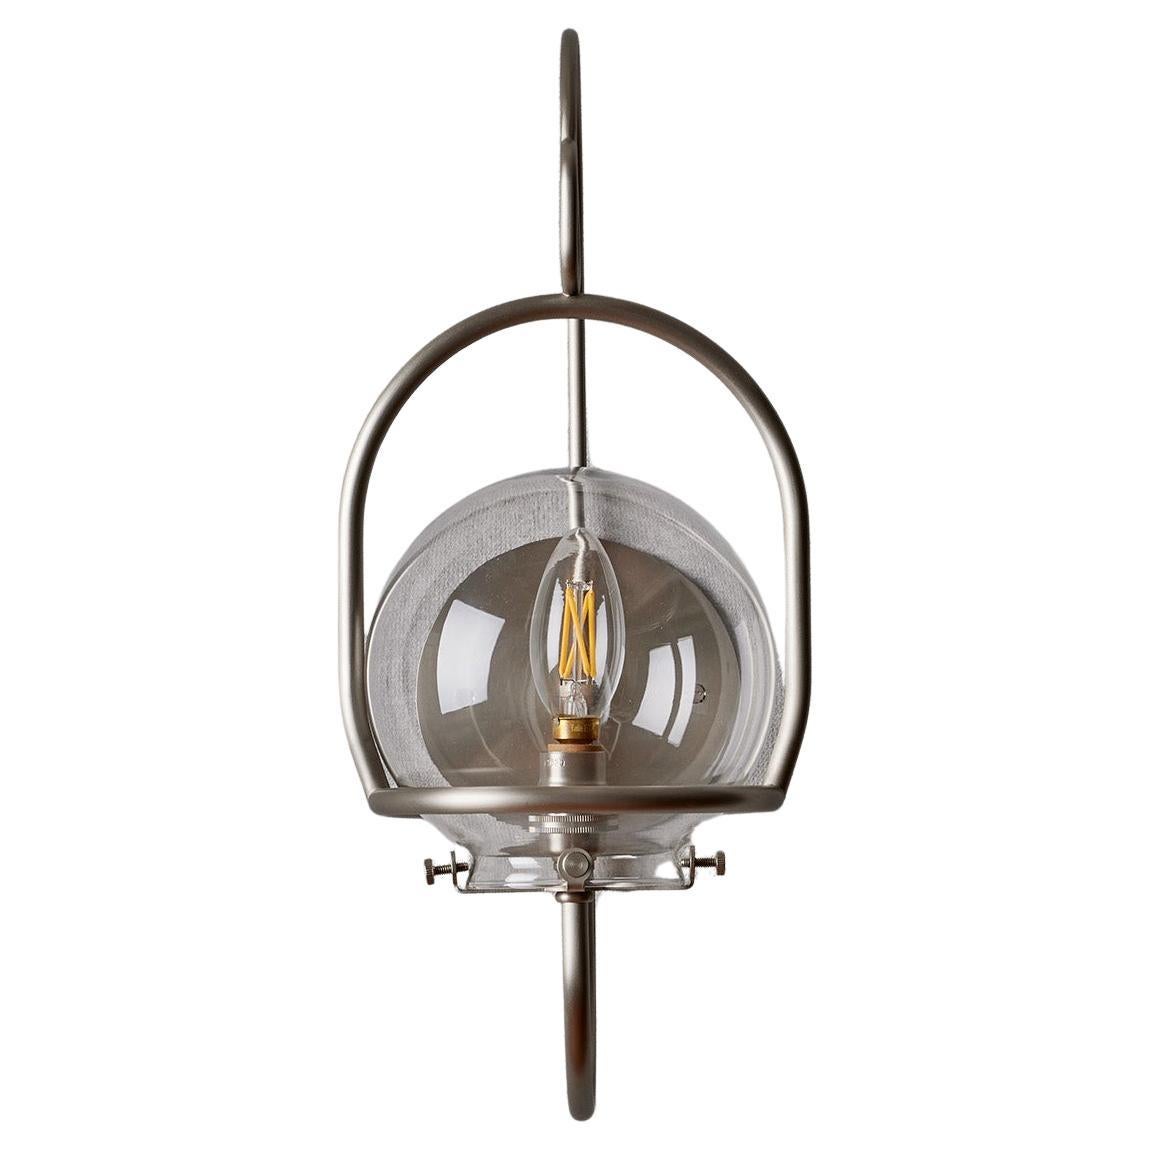 Brushed Satin Nickel Emil Lantern - Small - Outdoor Use For Sale